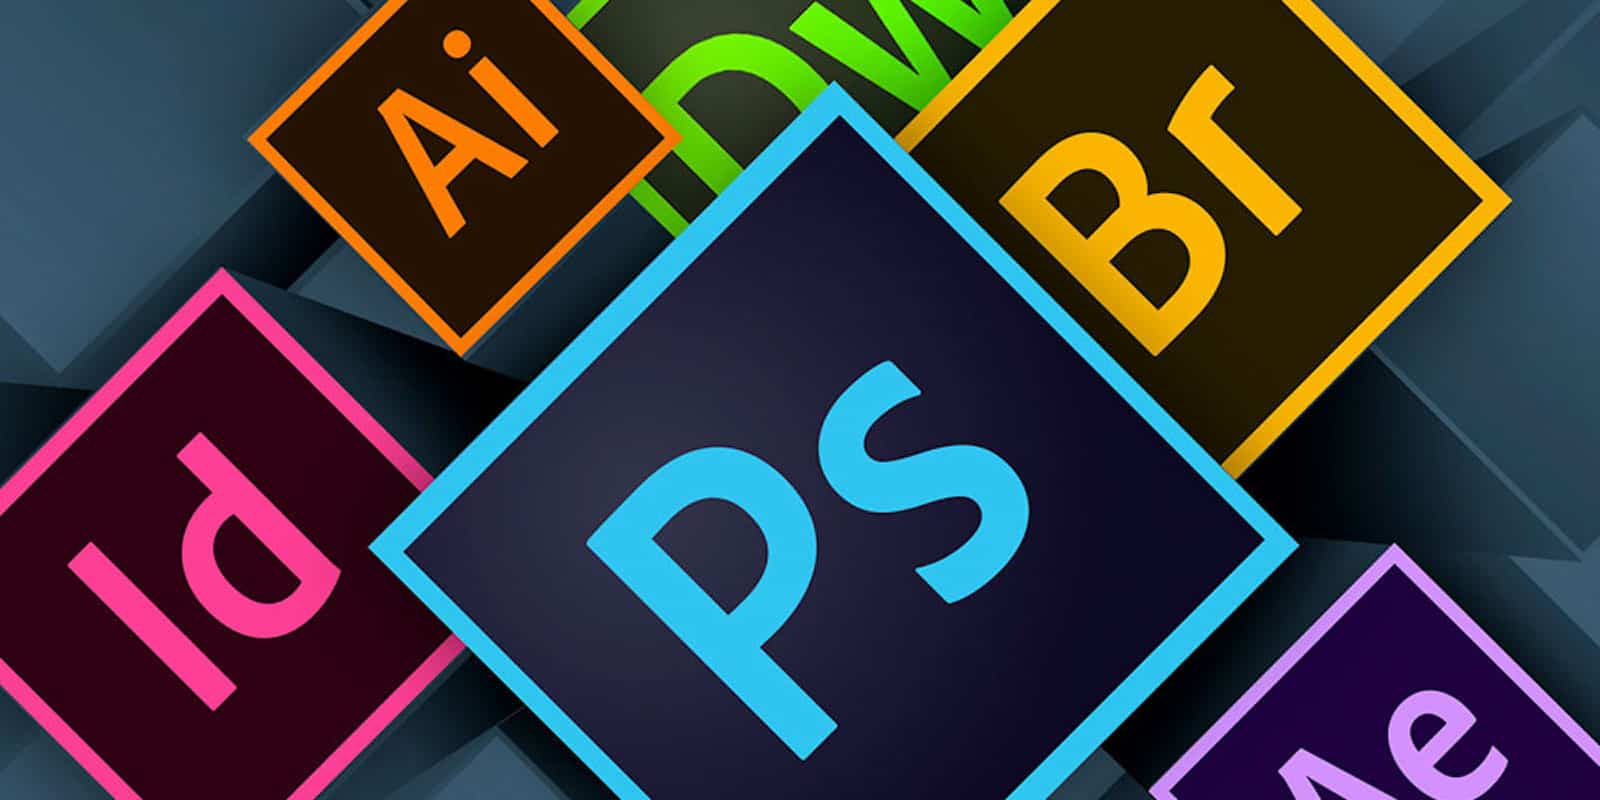 Get the skills you need with Adobe's creative apps for whatever you want to pay.